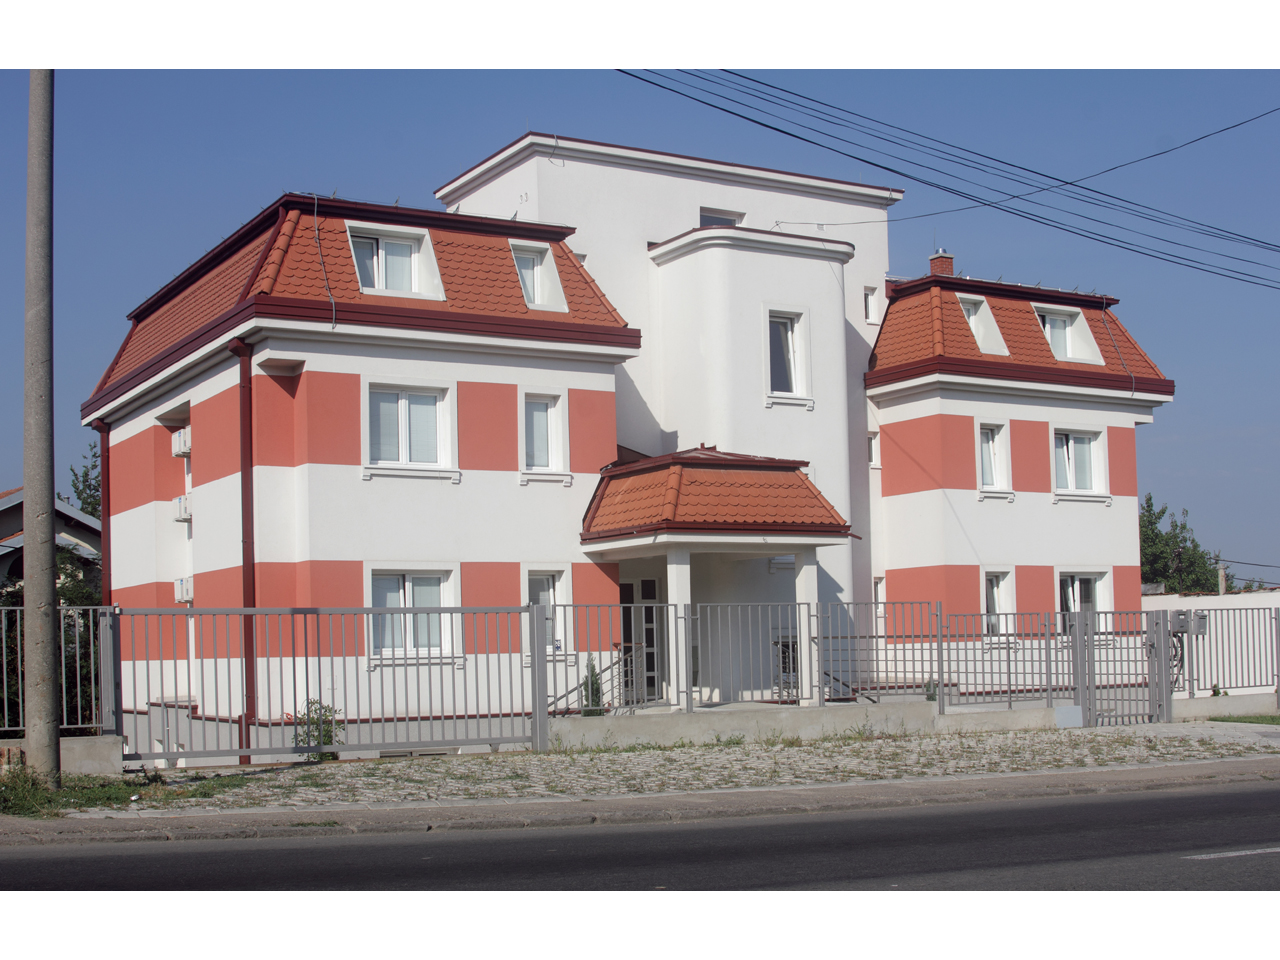 DOM ZA STARE MEDMARIS DOO Homes and care for the elderly Beograd